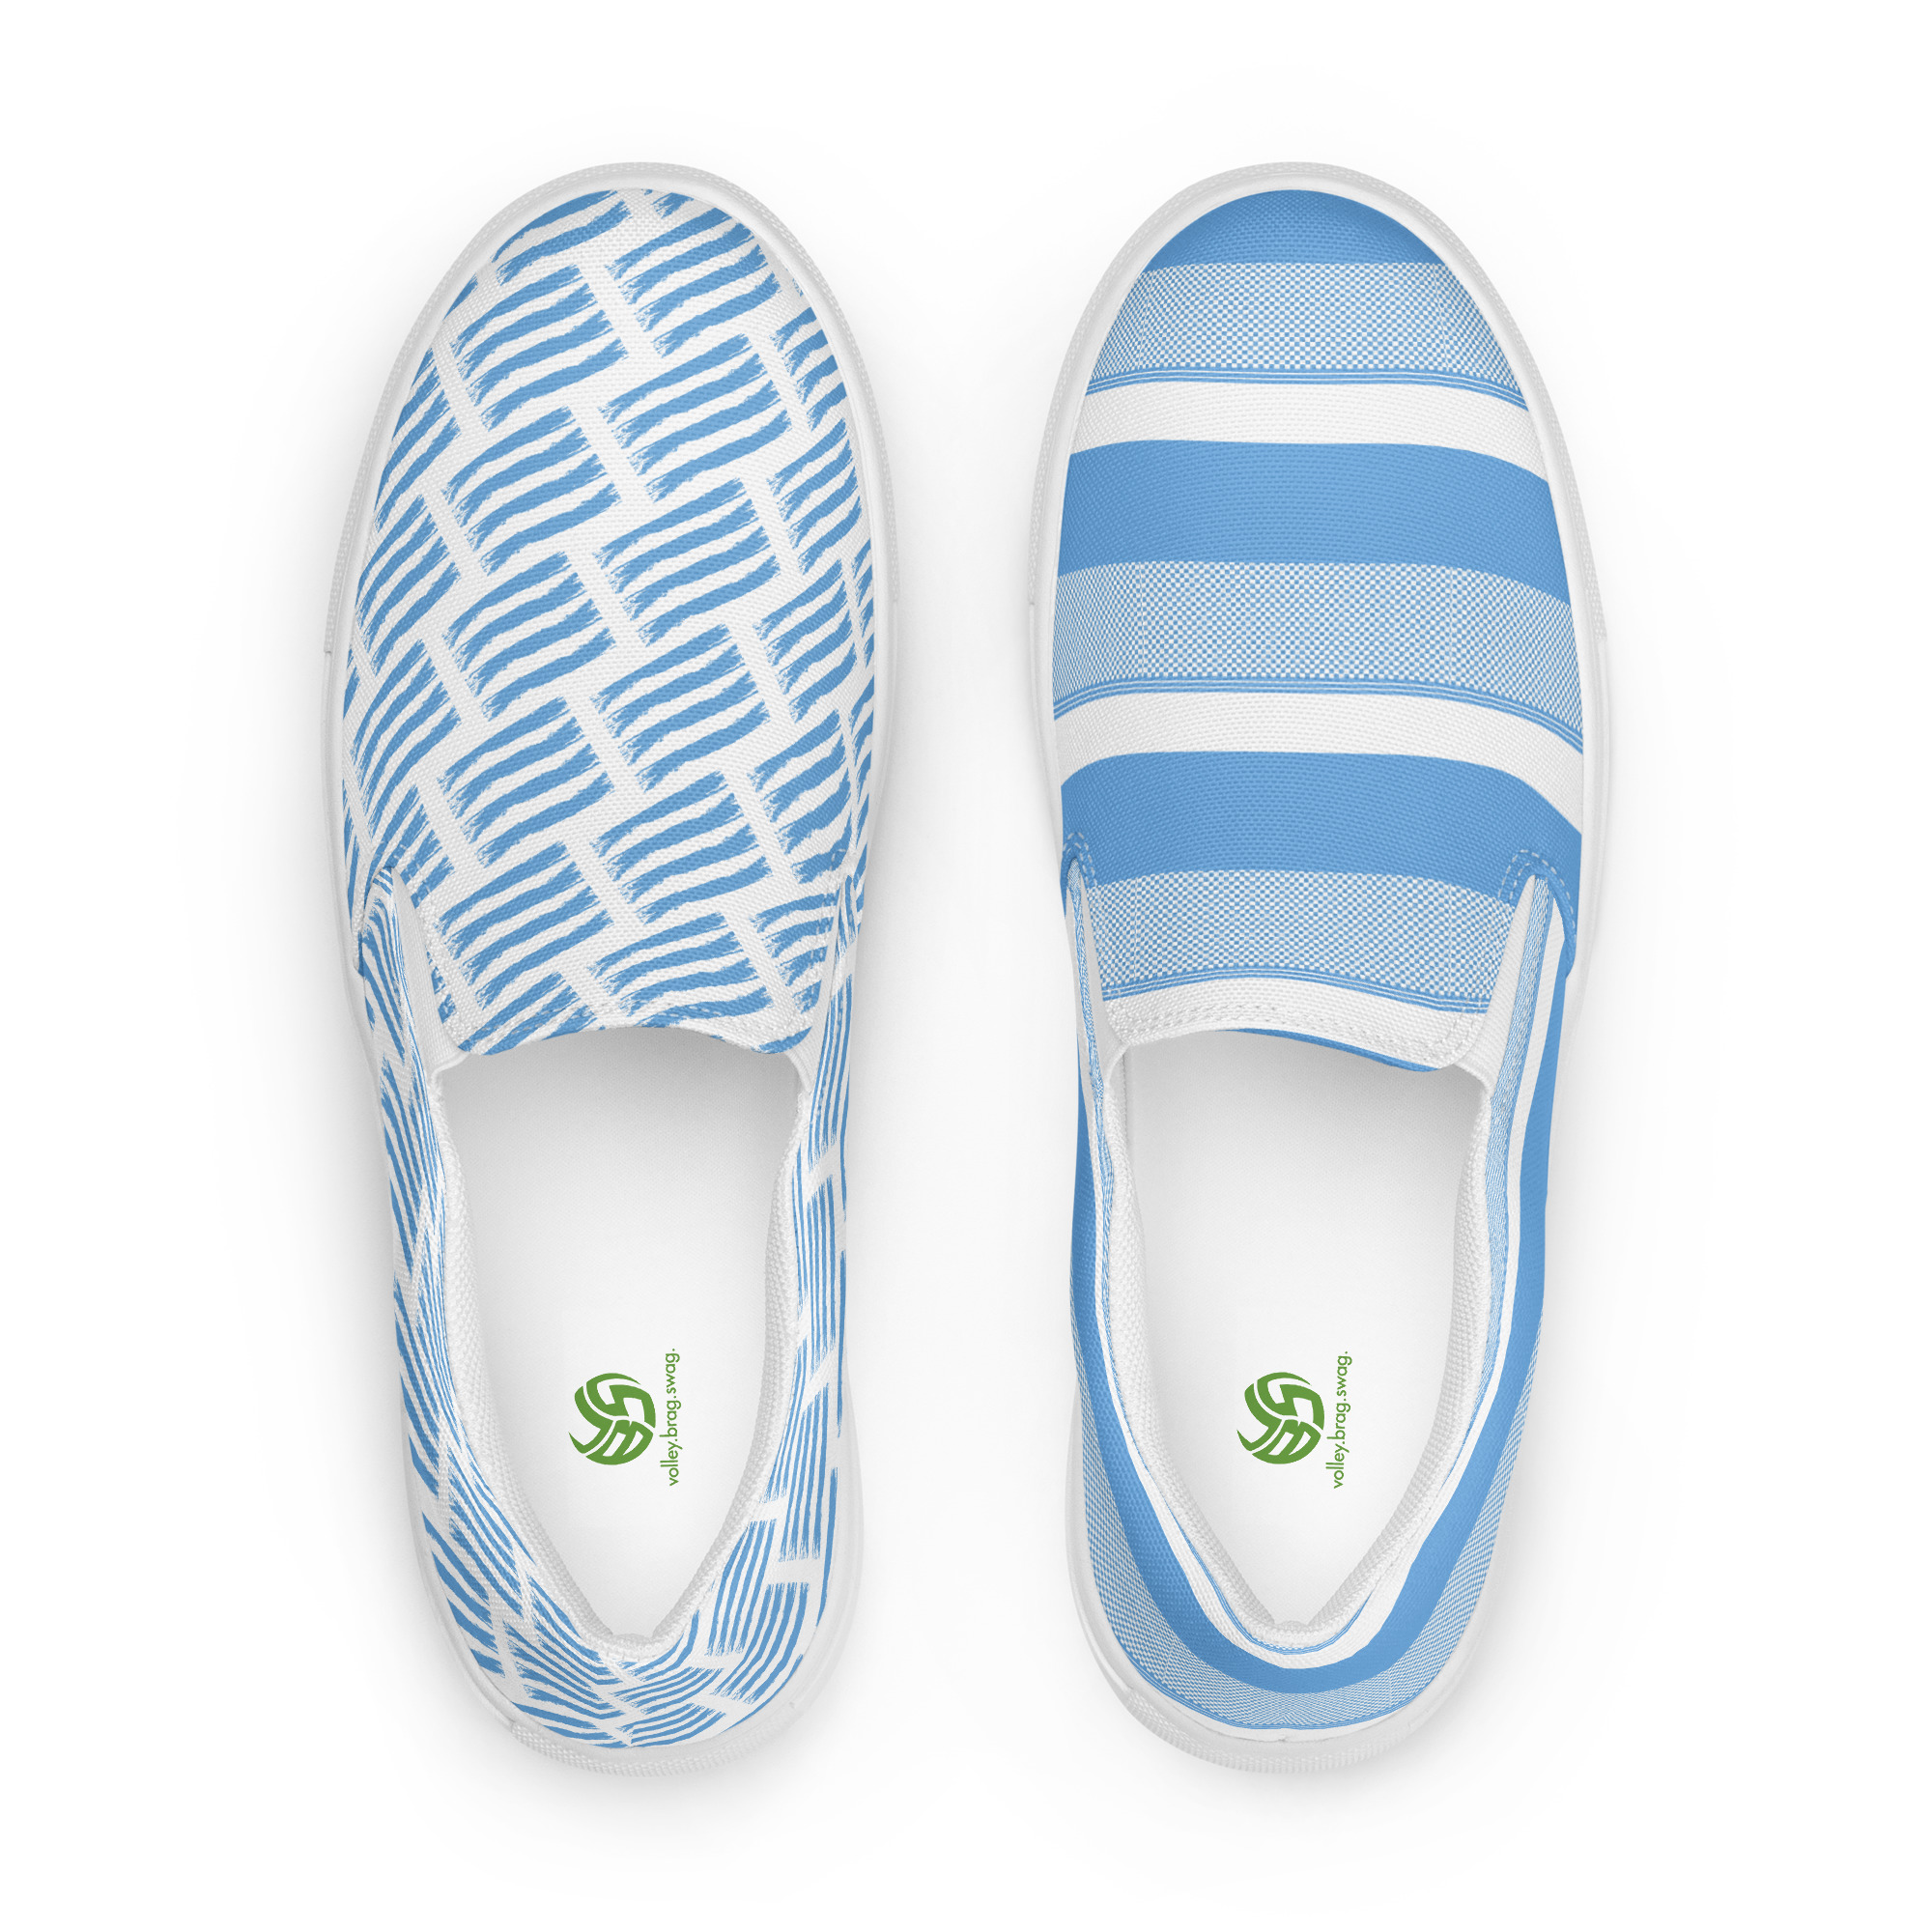 I designed my 2023-2024 women slip on canvas shoes with colorful patterns and cute volleyball designs so beach volleyball players can match them with swimwear.